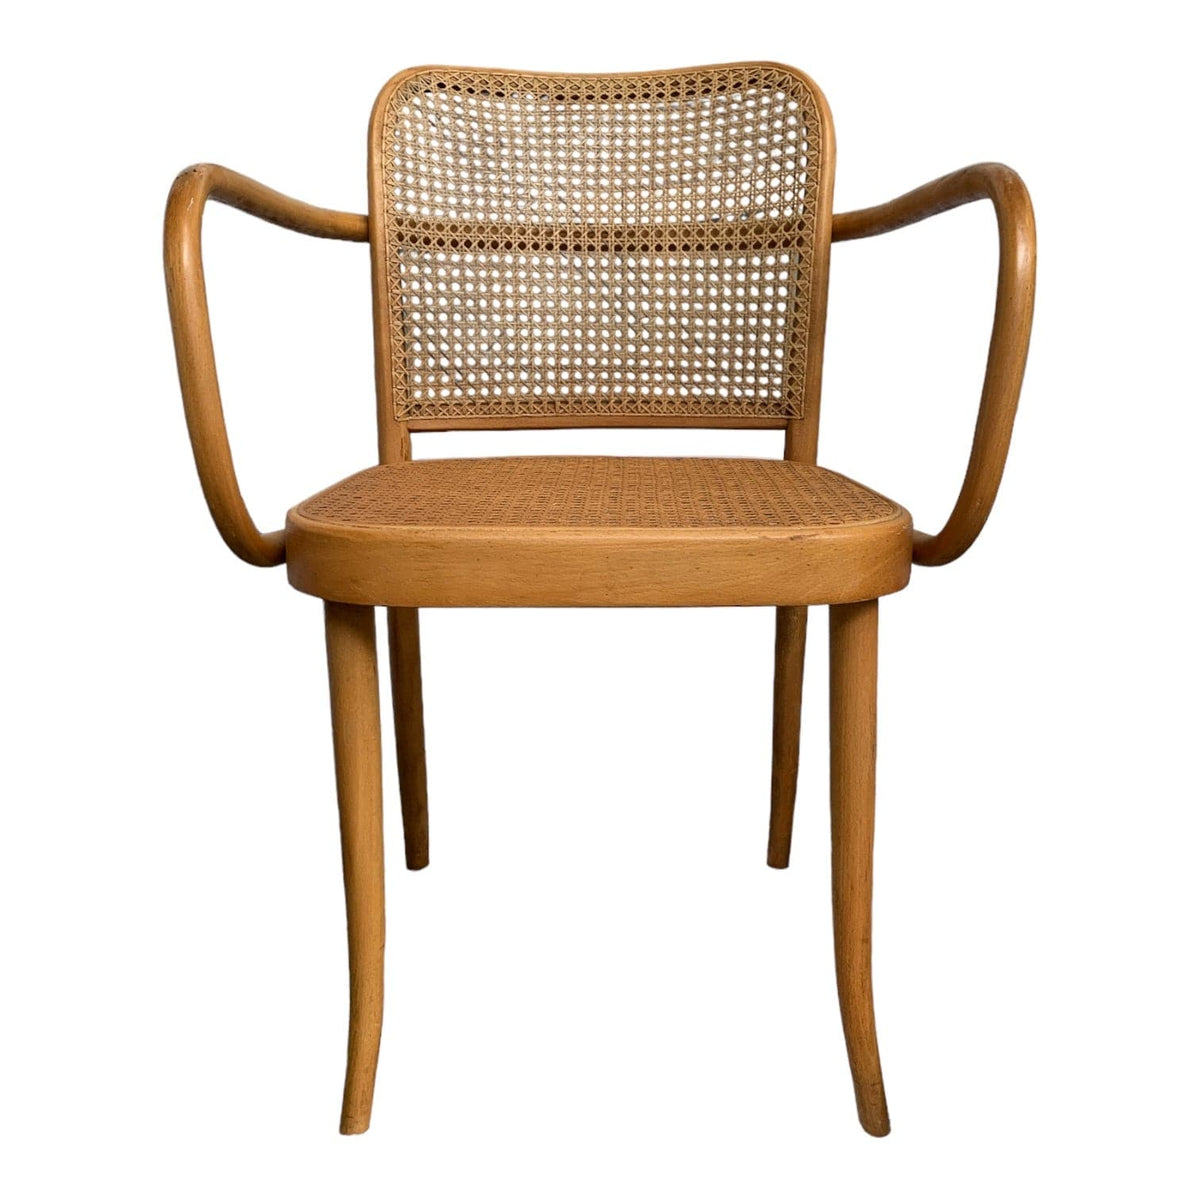 Bentwood & Cane Cafe Chairs Little & Fox